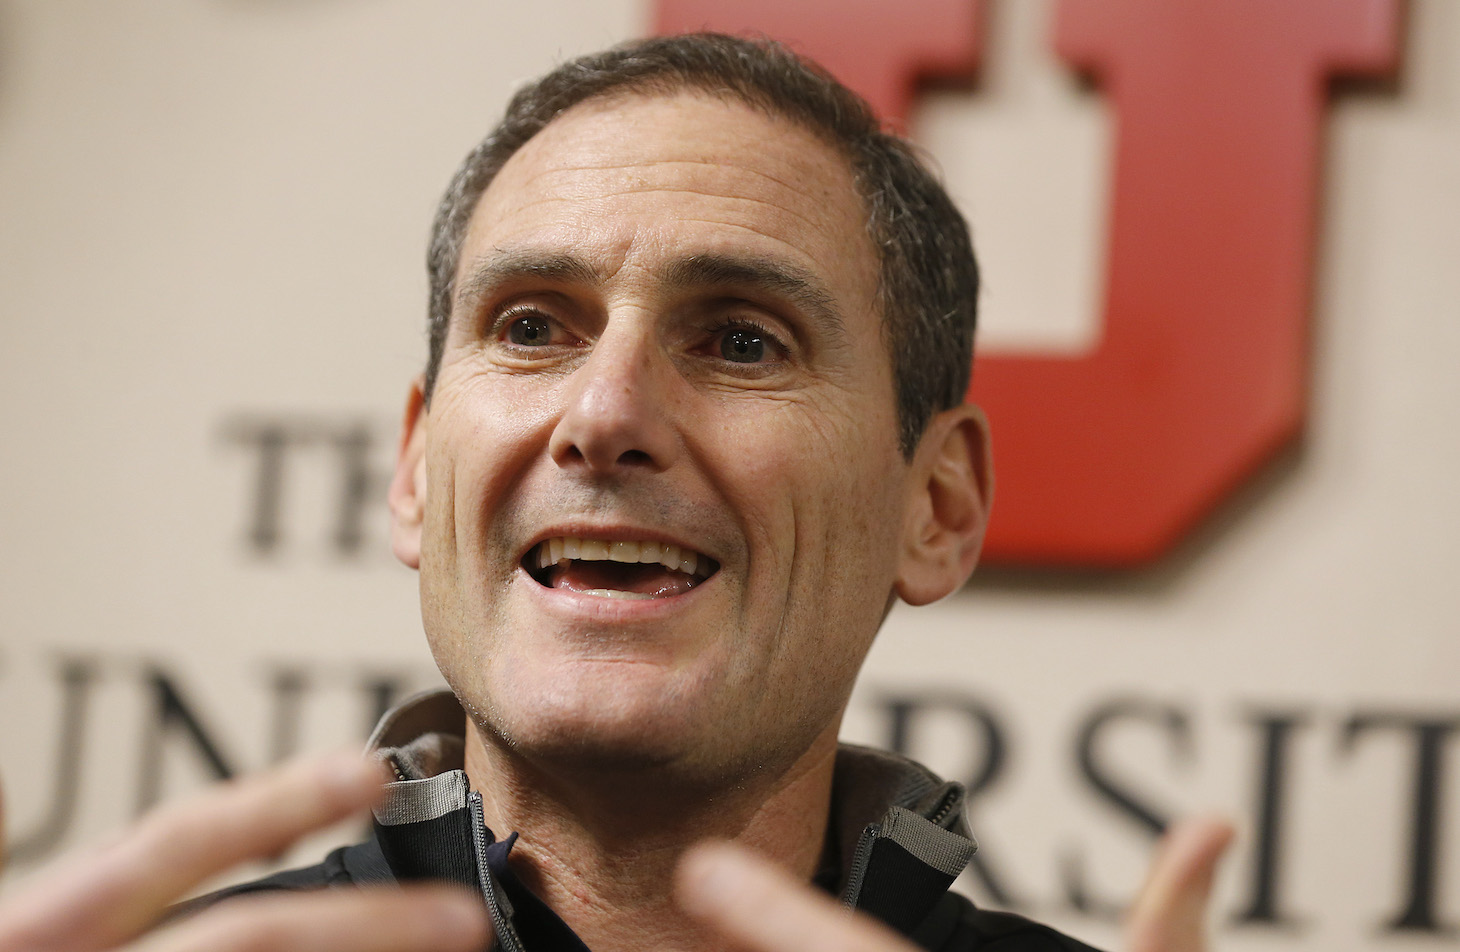 SALT LAKE CITY, UT - NOVEMBER 8: Pac 12 commissioner Larry Scott talks to the media before an NCAA football game between Utah Utes and the Oregon Ducks on November 8, 2014 at Rice-Eccles Stadium in Salt Lake City, Utah. (Photo by George Frey/Getty Images)